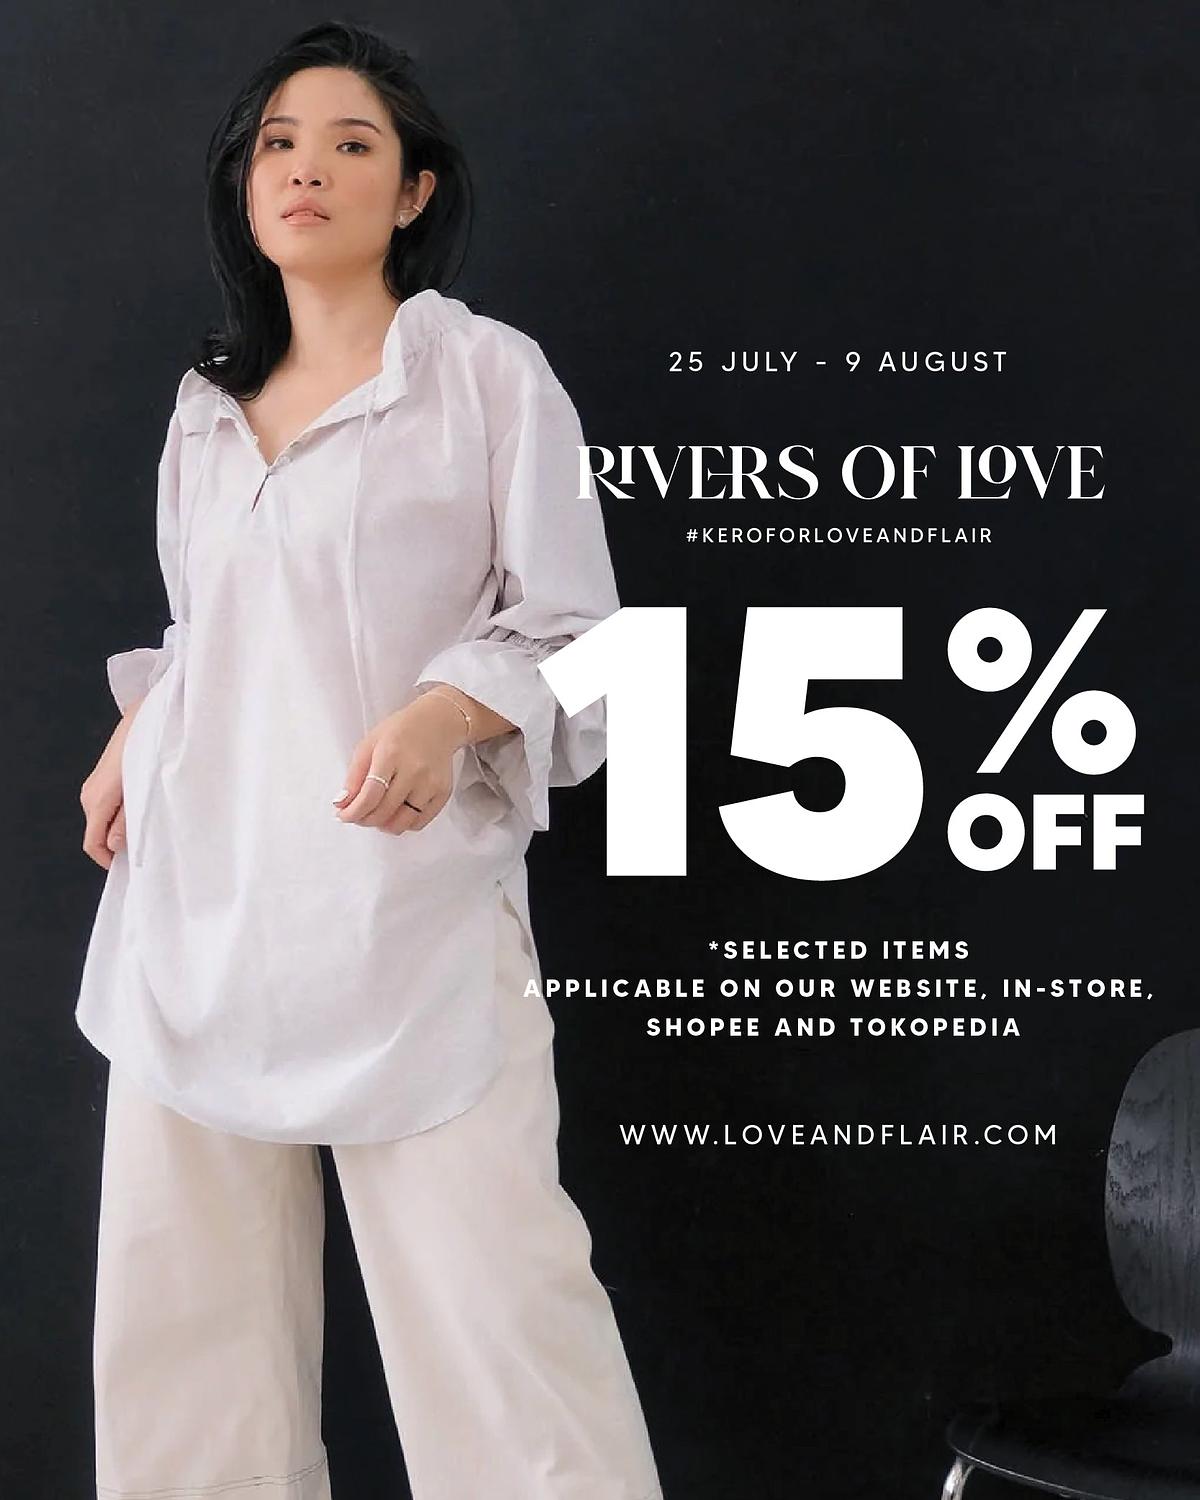  25 JULY - 9 AUGUST RIVIERS OF IOVE #KEROFORLOVEANDFLAIR *SELECTED ITEMS PPLICABLE ON OUR WEBSITE, IN-STORE, SHOPEE AND TOKOPEDIA WWW.LOVEANDFLAIR.COM 